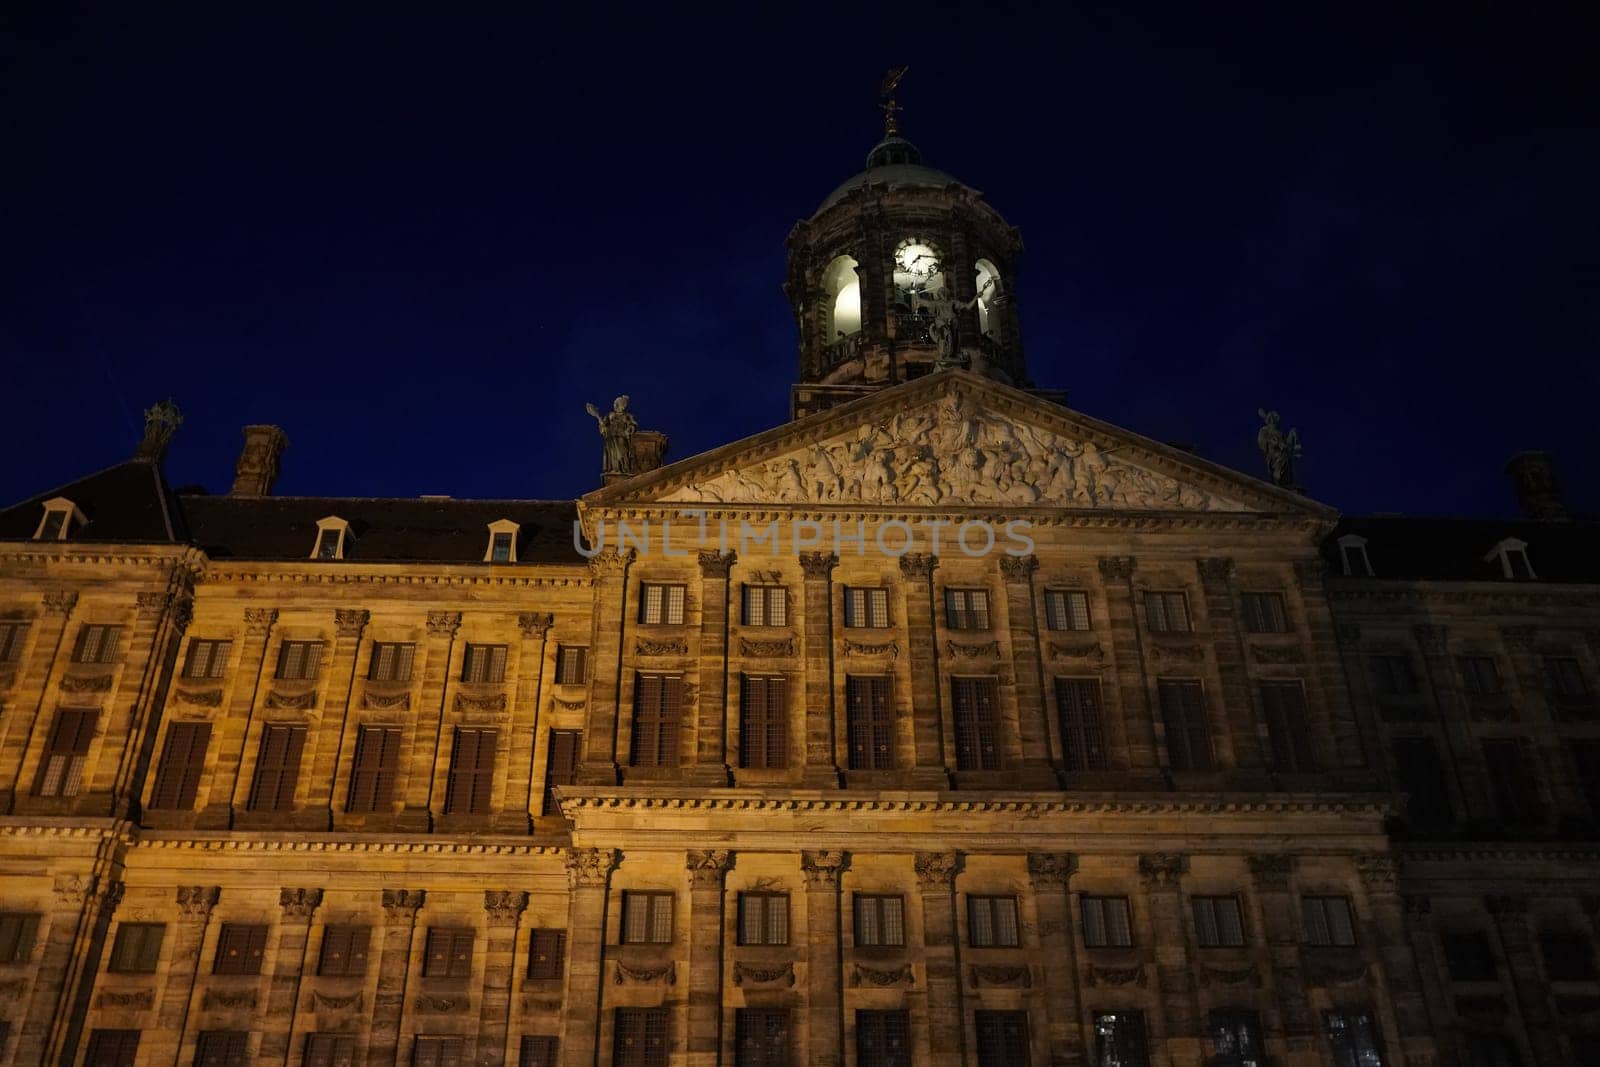 The City Hall of Amsterdam by night view